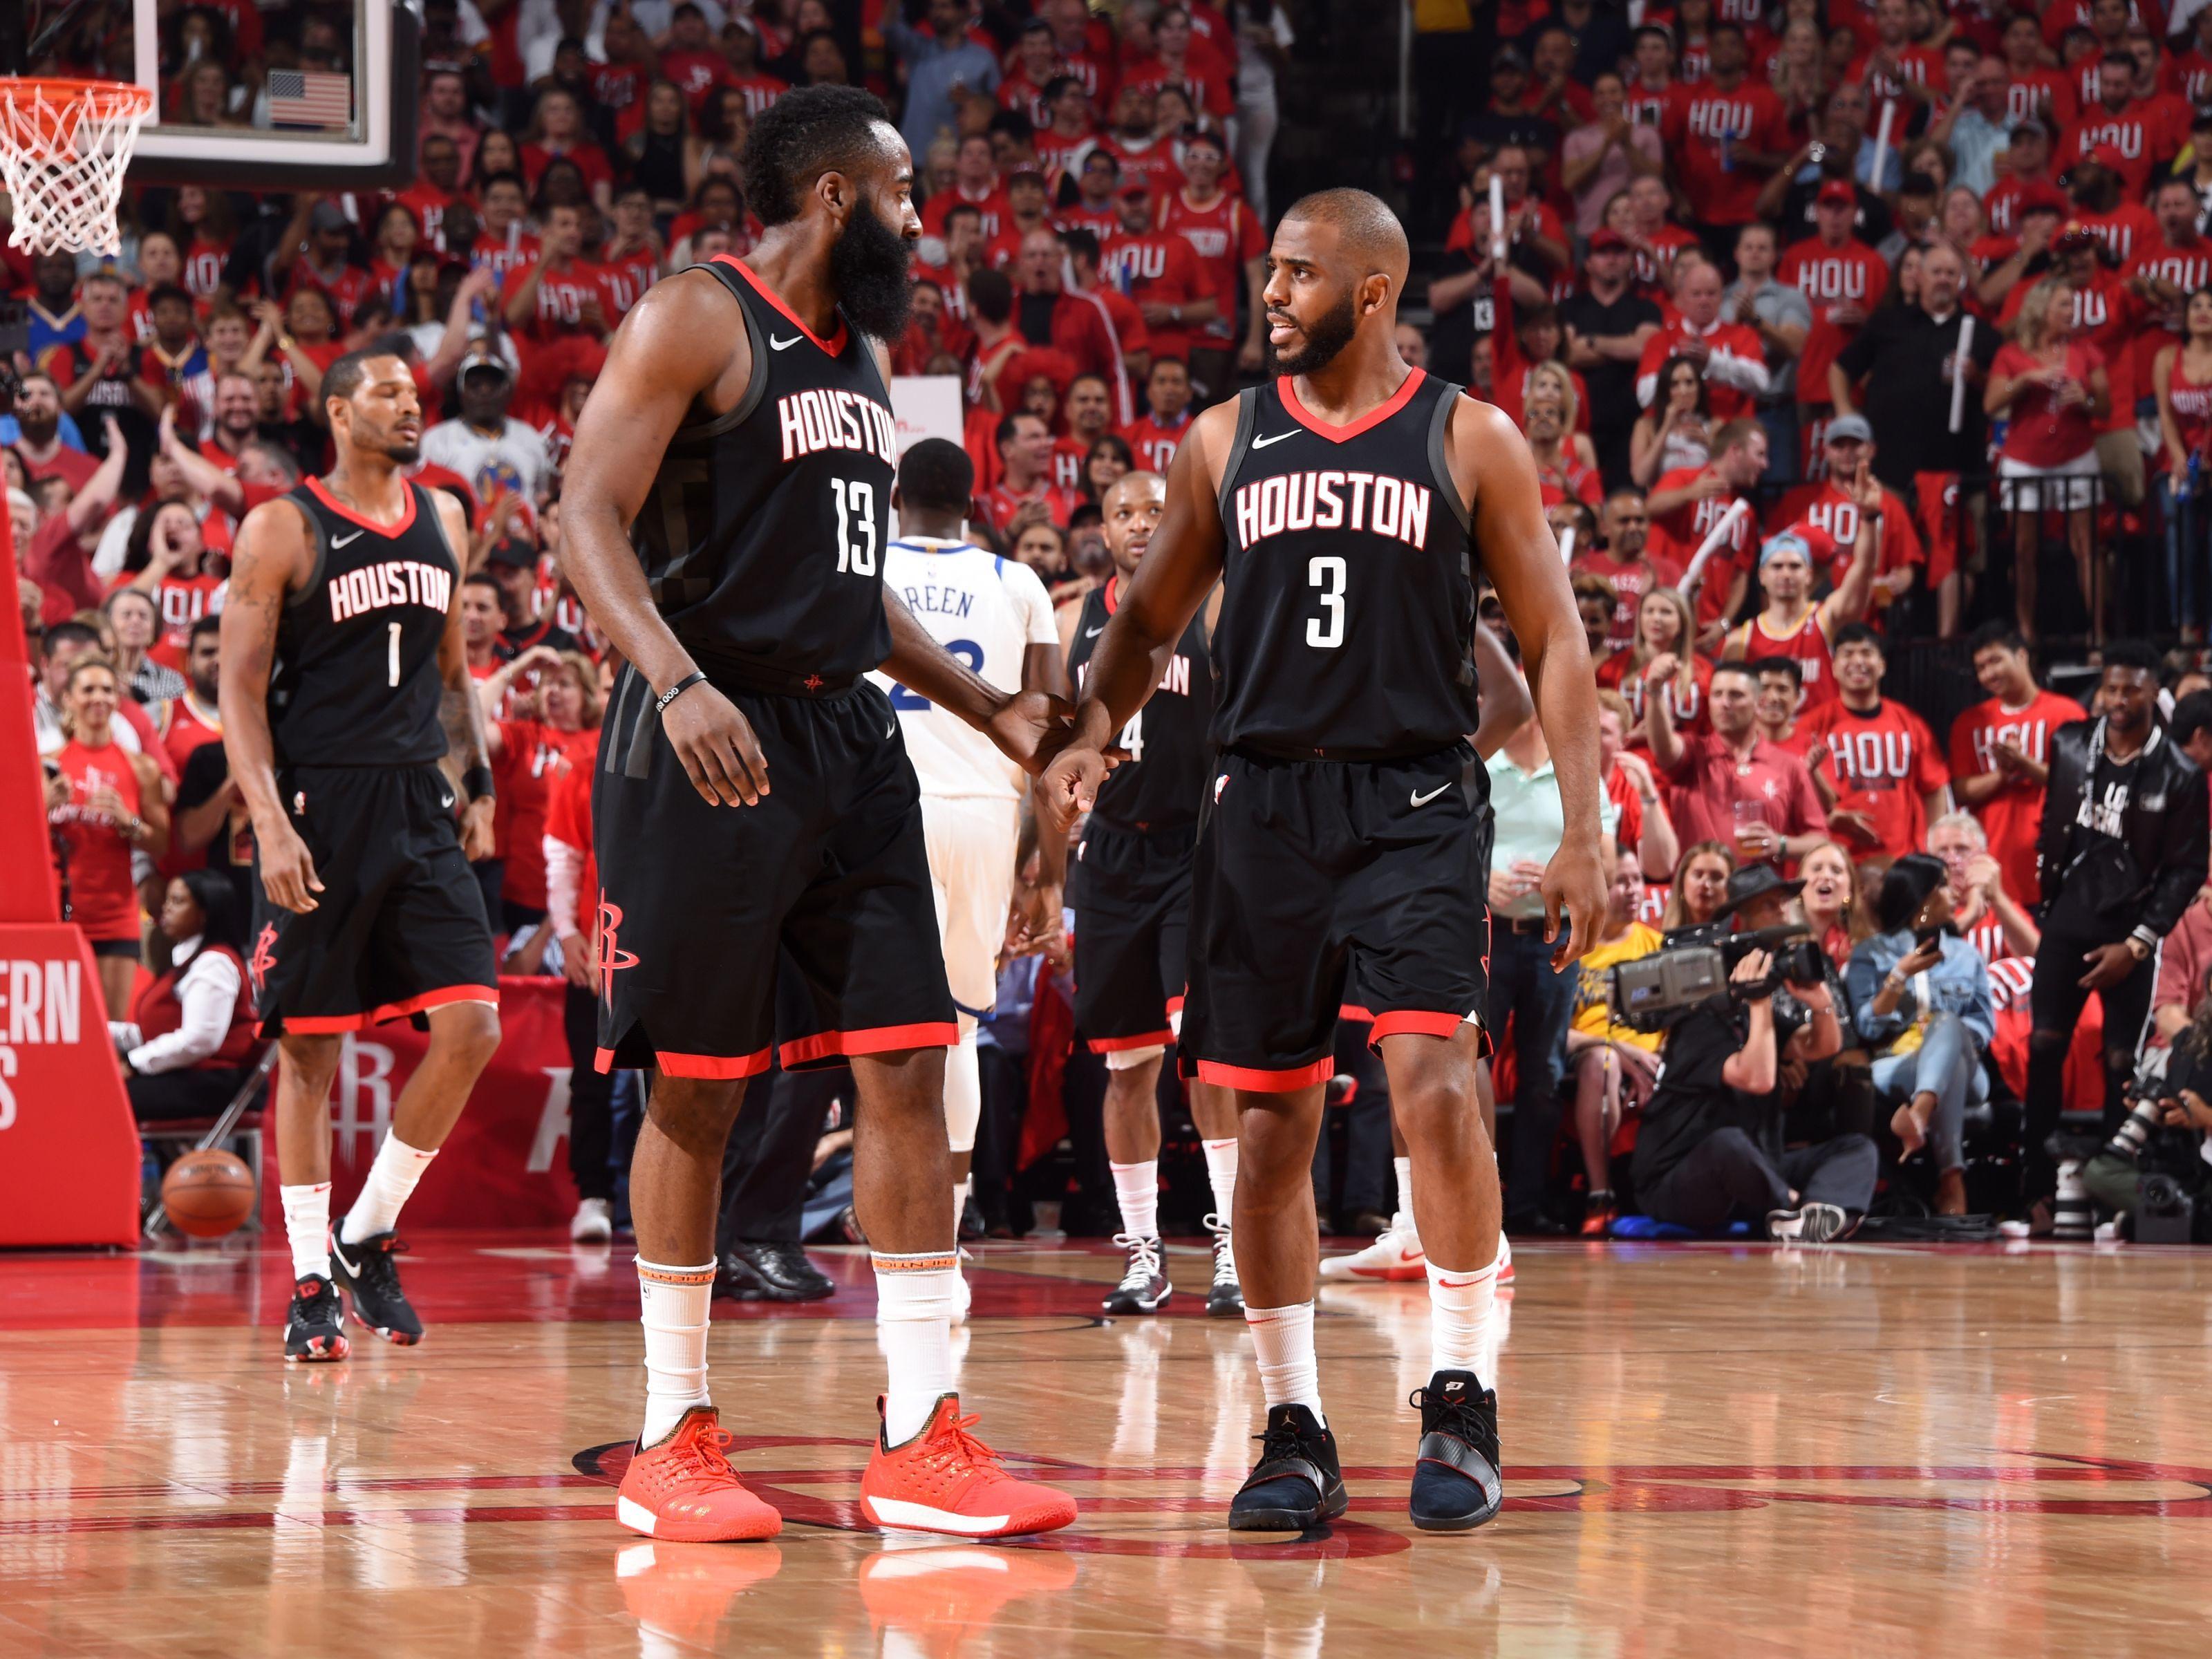 Predicting the NBA 2K19 ratings for Houston Rockets players